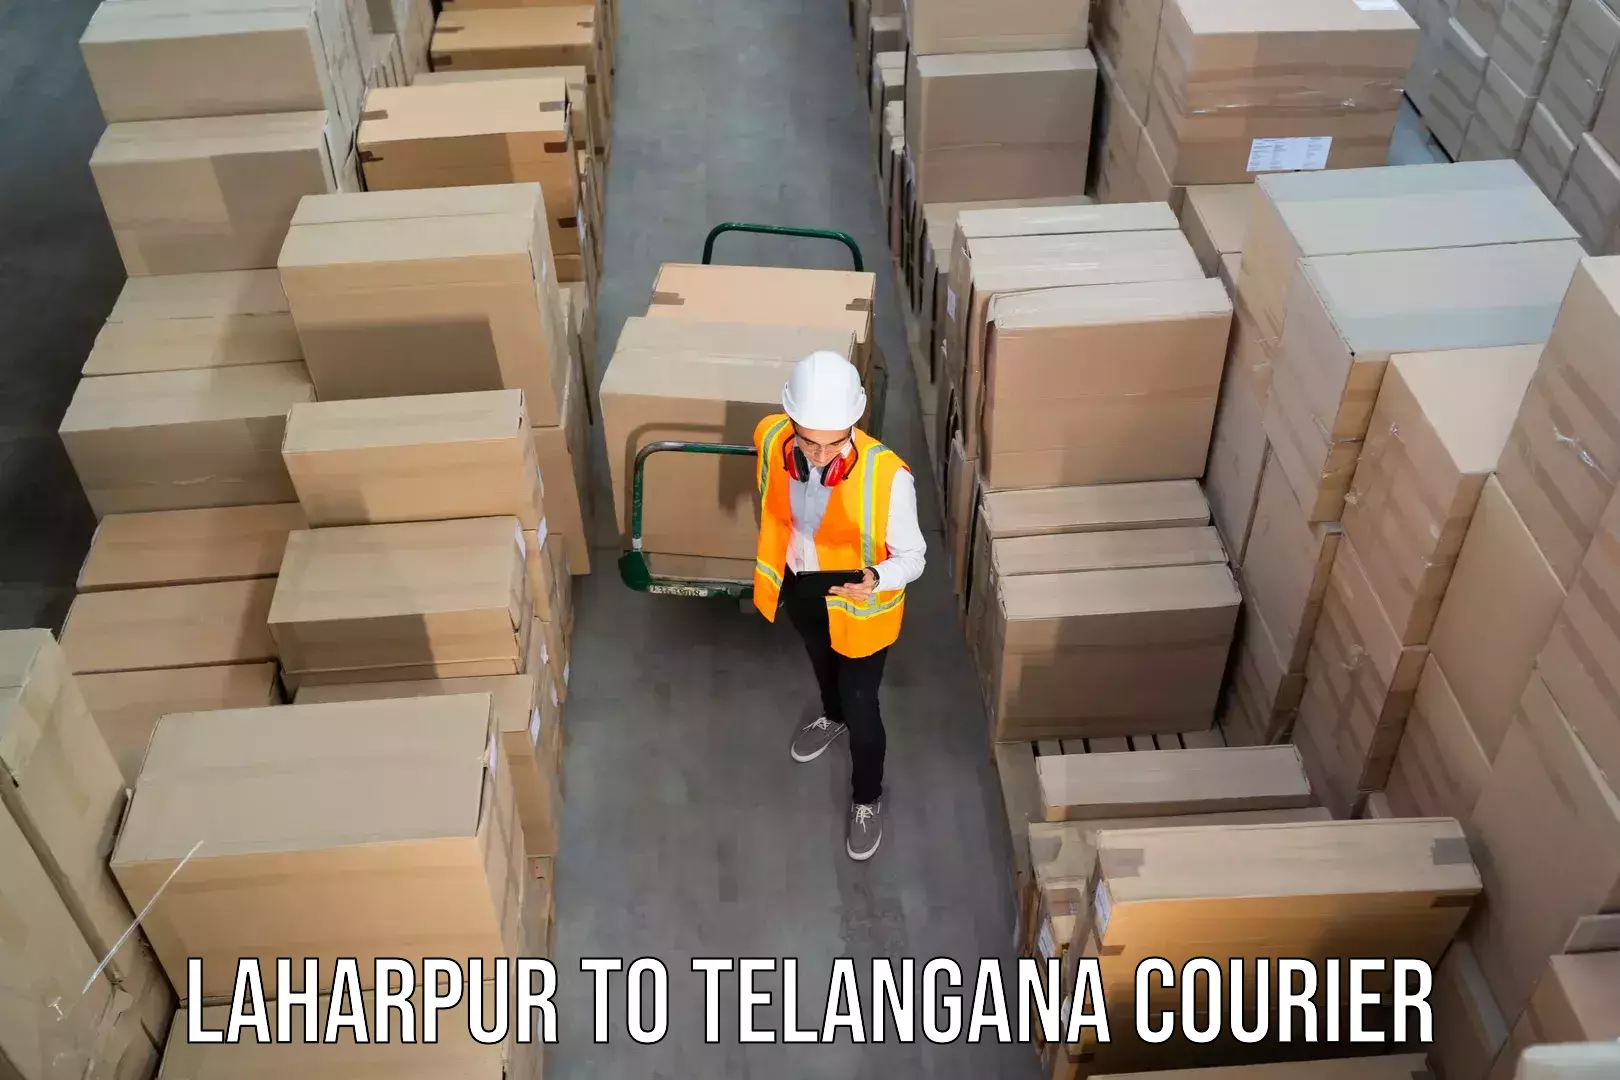 Efficient package consolidation Laharpur to Bellampalli